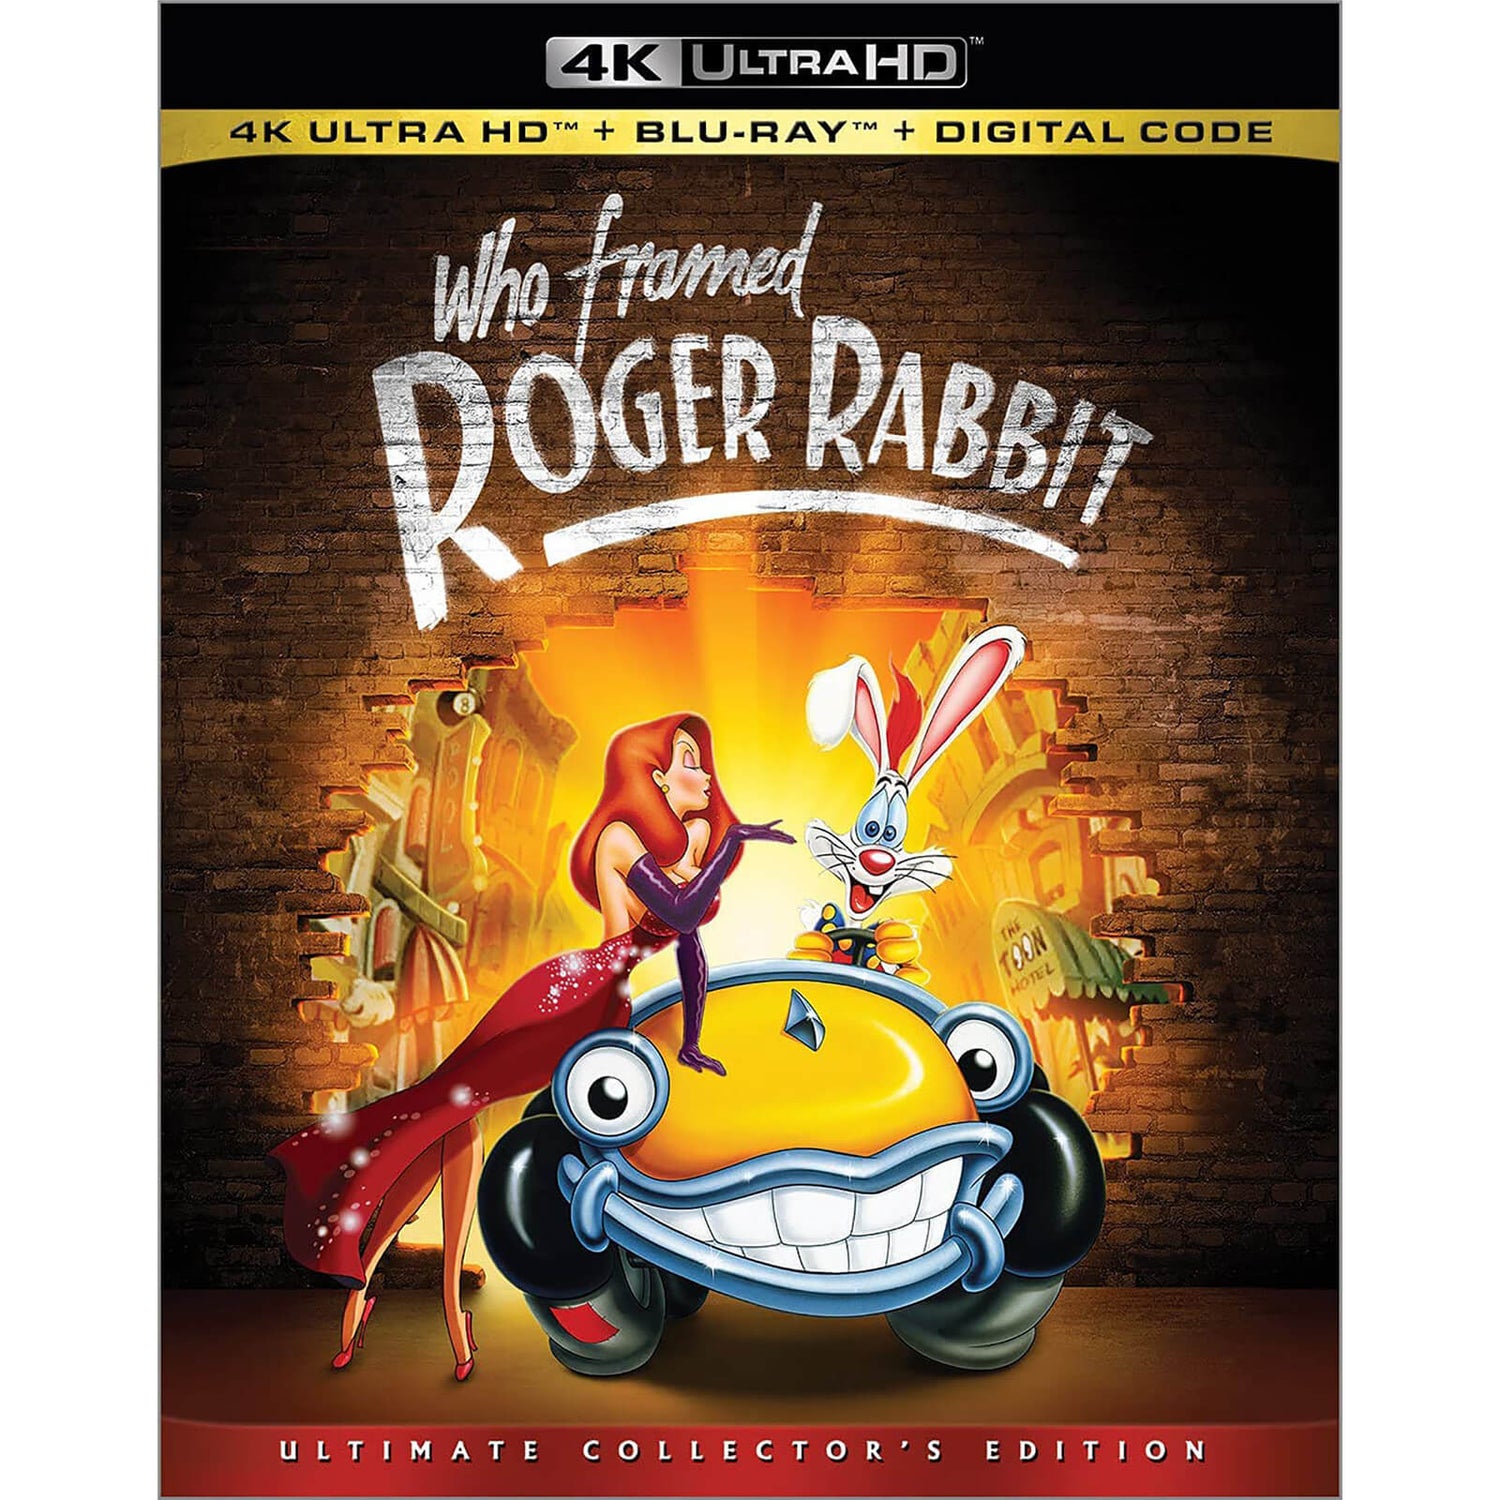 Who Framed Roger Rabbit: Ultimate Collector's Edition - 4K Ultra HD (Includes Blu-ray) (US Import)